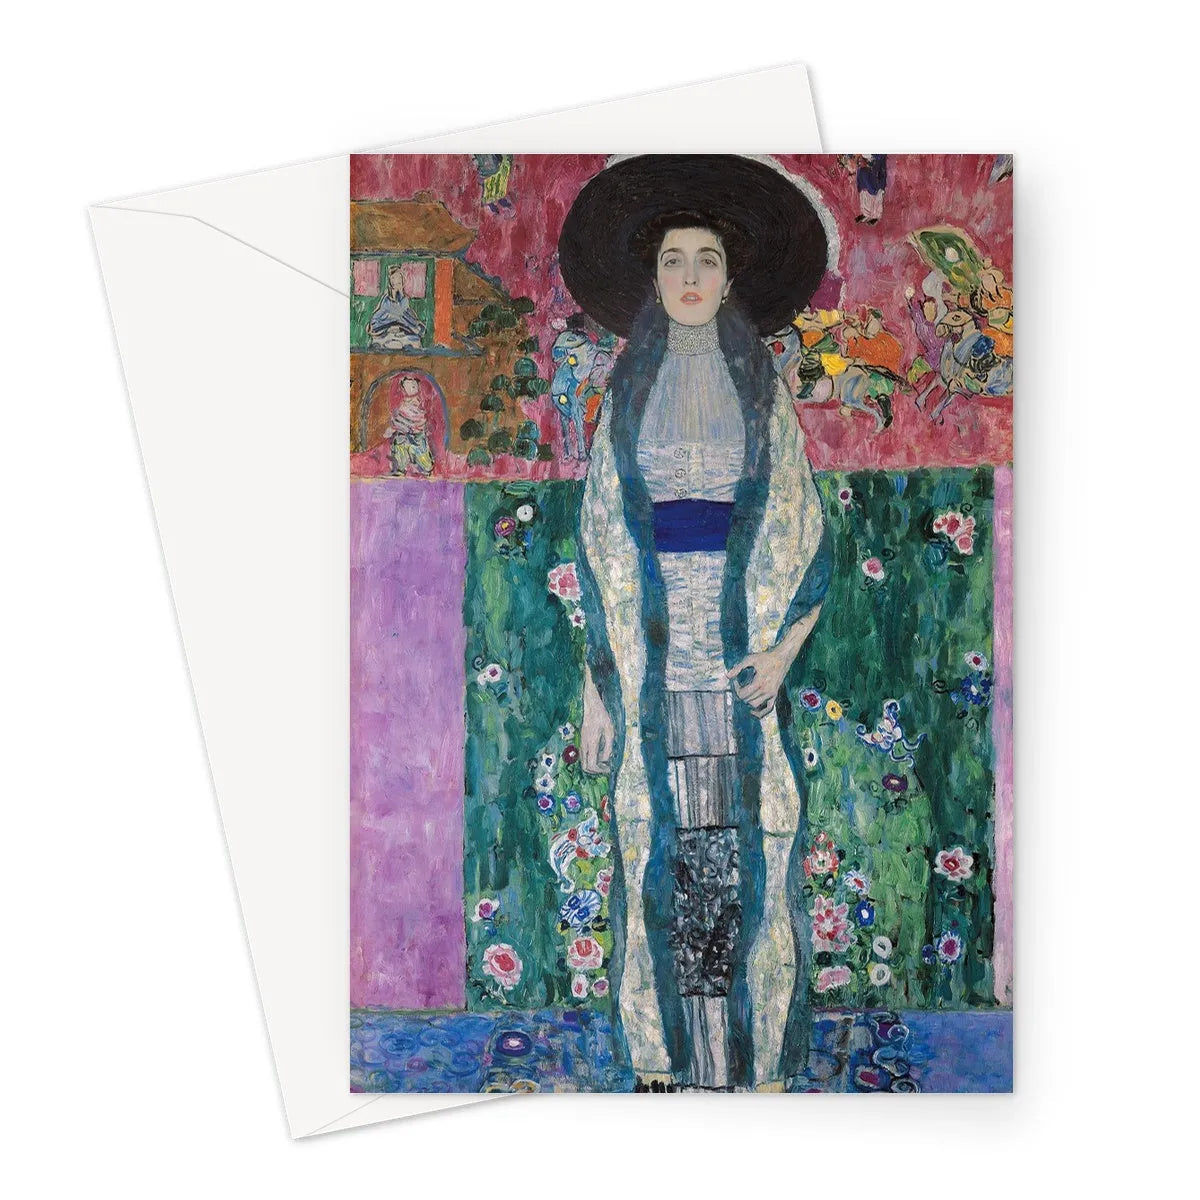 Adele Bloch-bauer By Gustav Klimt Greeting Card - A5 Portrait / 1 Card - Greeting & Note Cards - Aesthetic Art